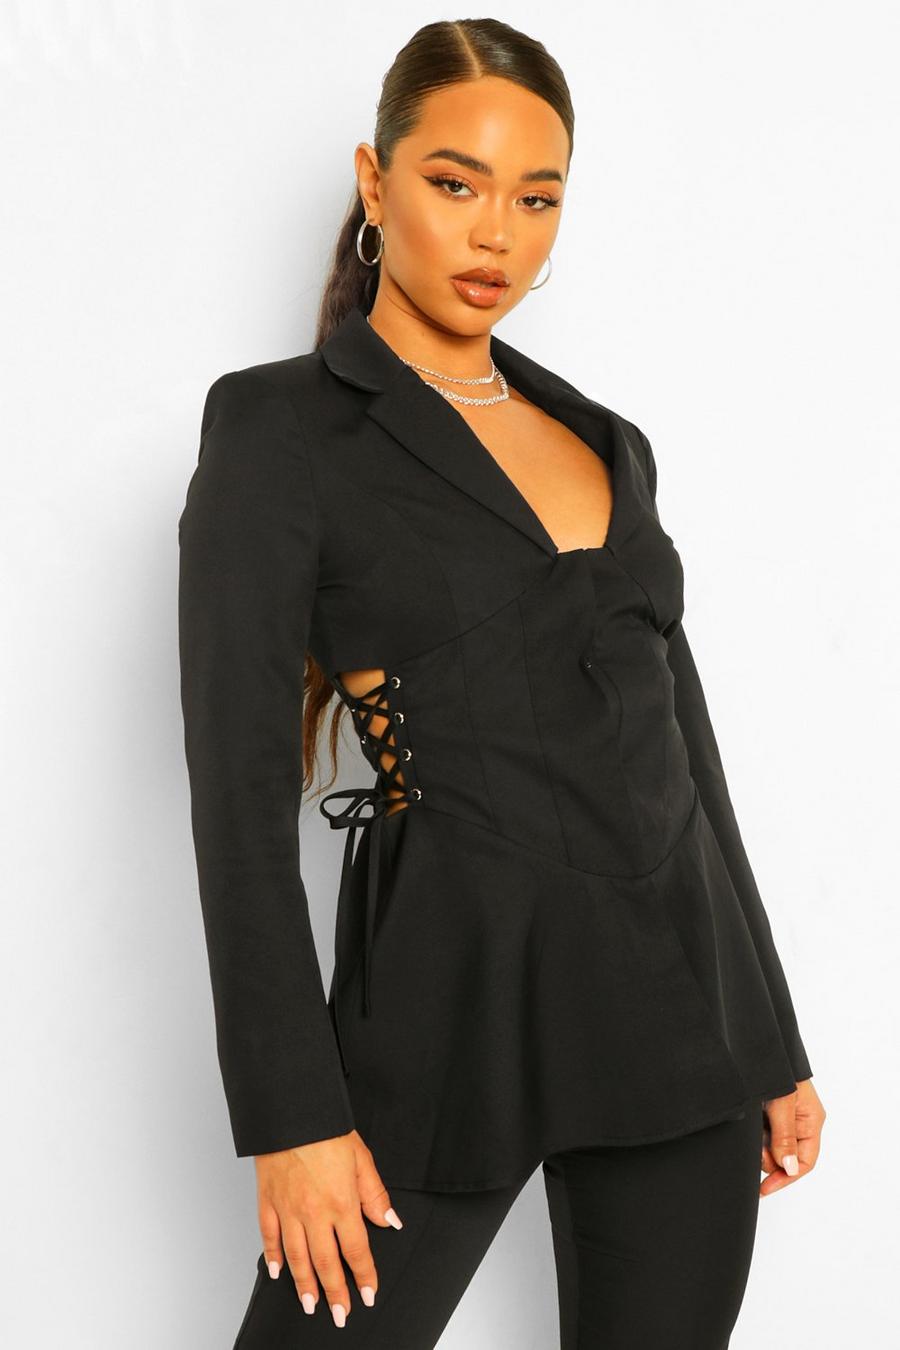 black fitted corset jacket